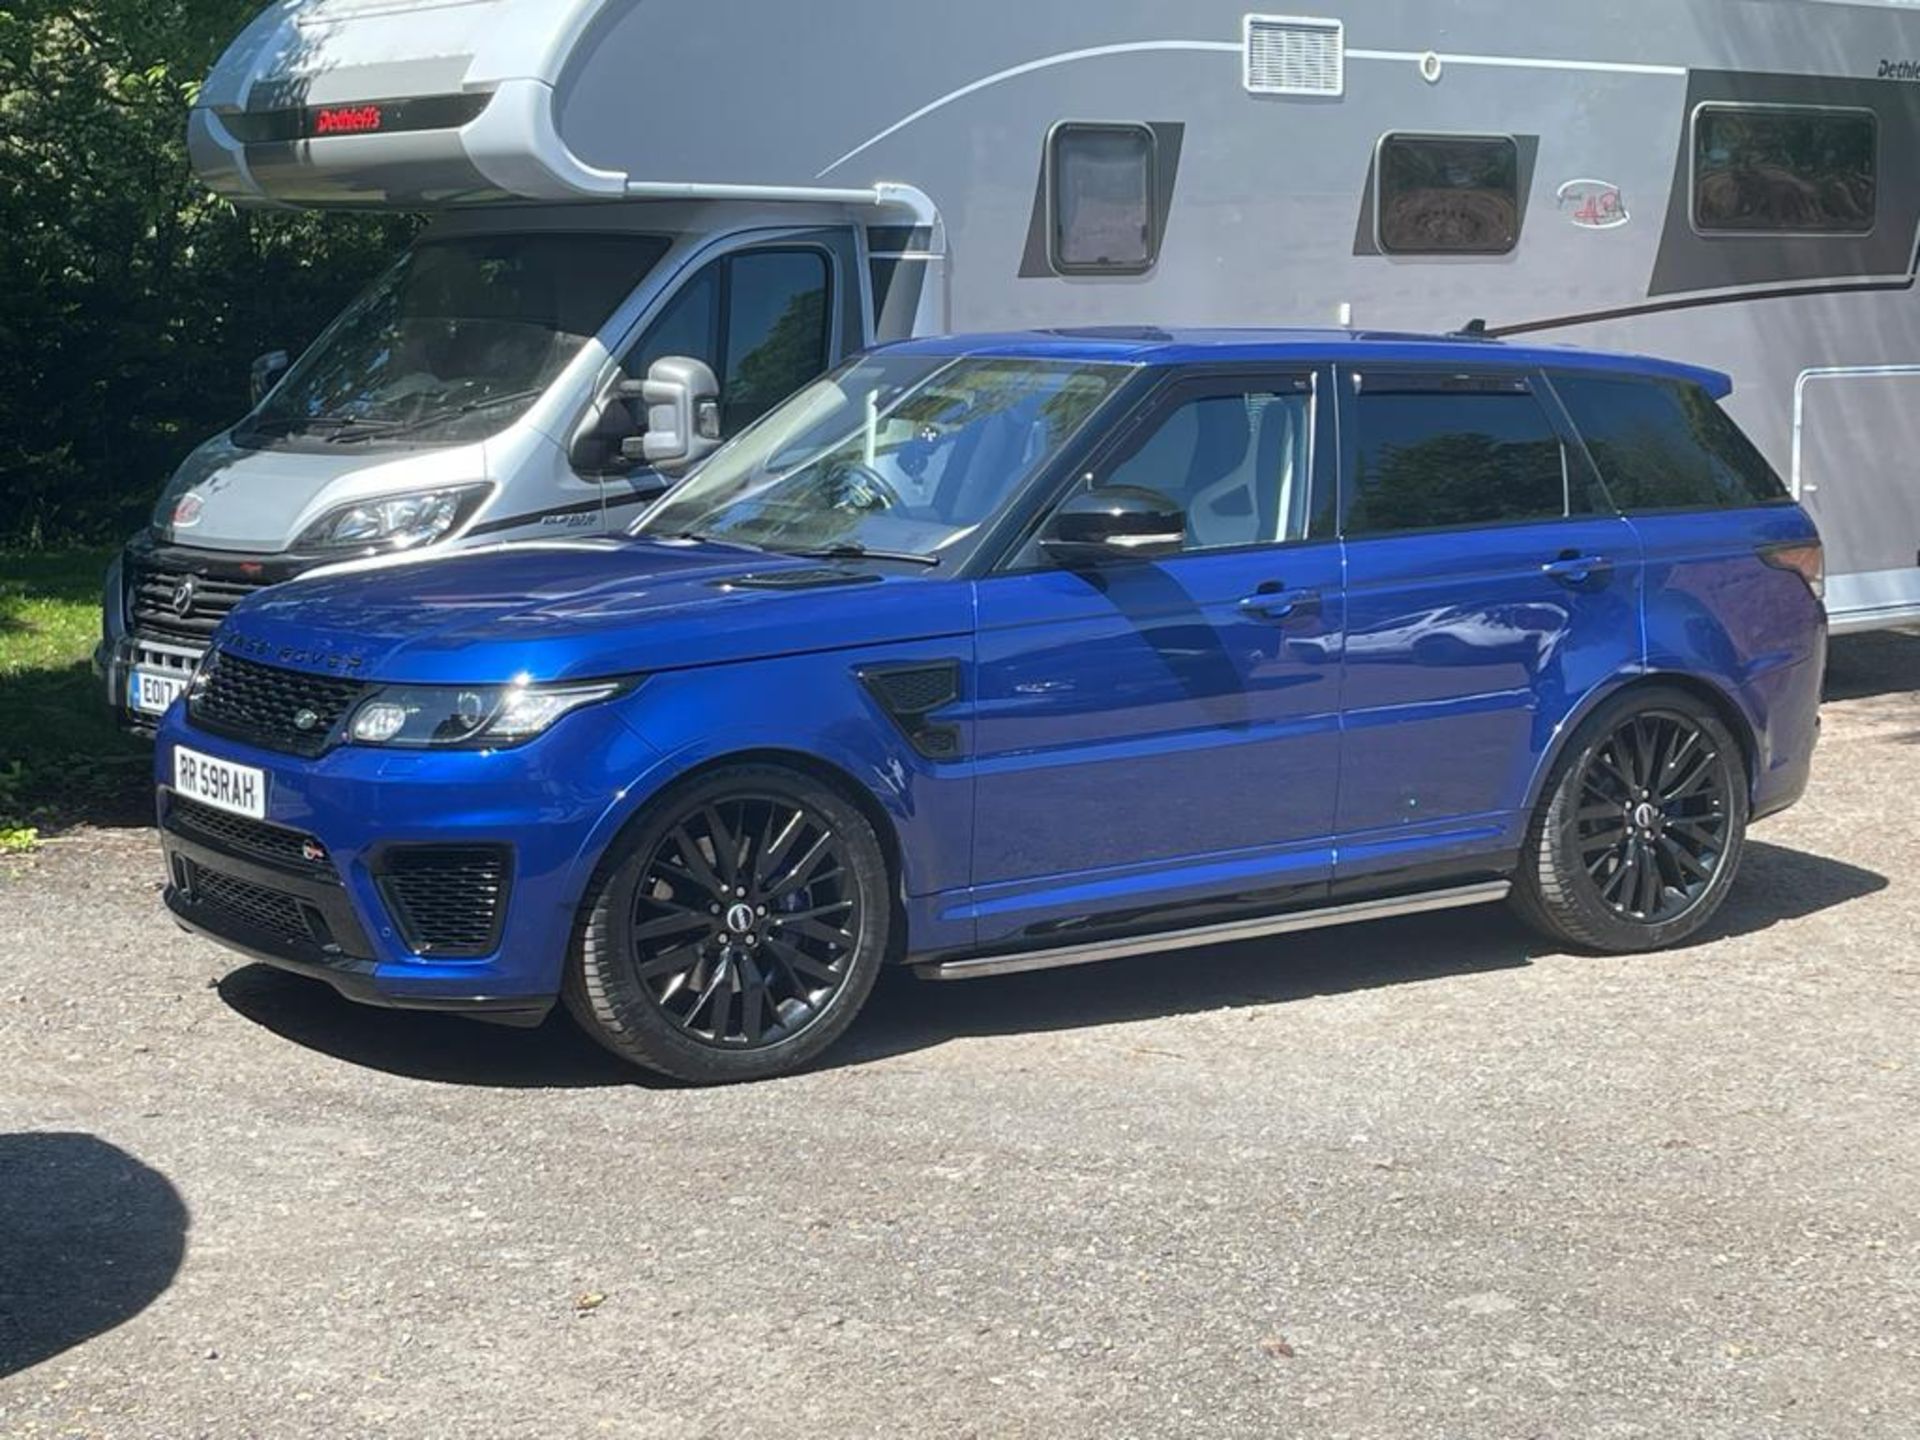 2016 RANGE ROVER SPORT SVR AUTOBIOGRAPHY DYNAMIC V8 SUPERCHARGED AUTOMATIC 5.0 550PS PETROL ENGINE - Image 3 of 28